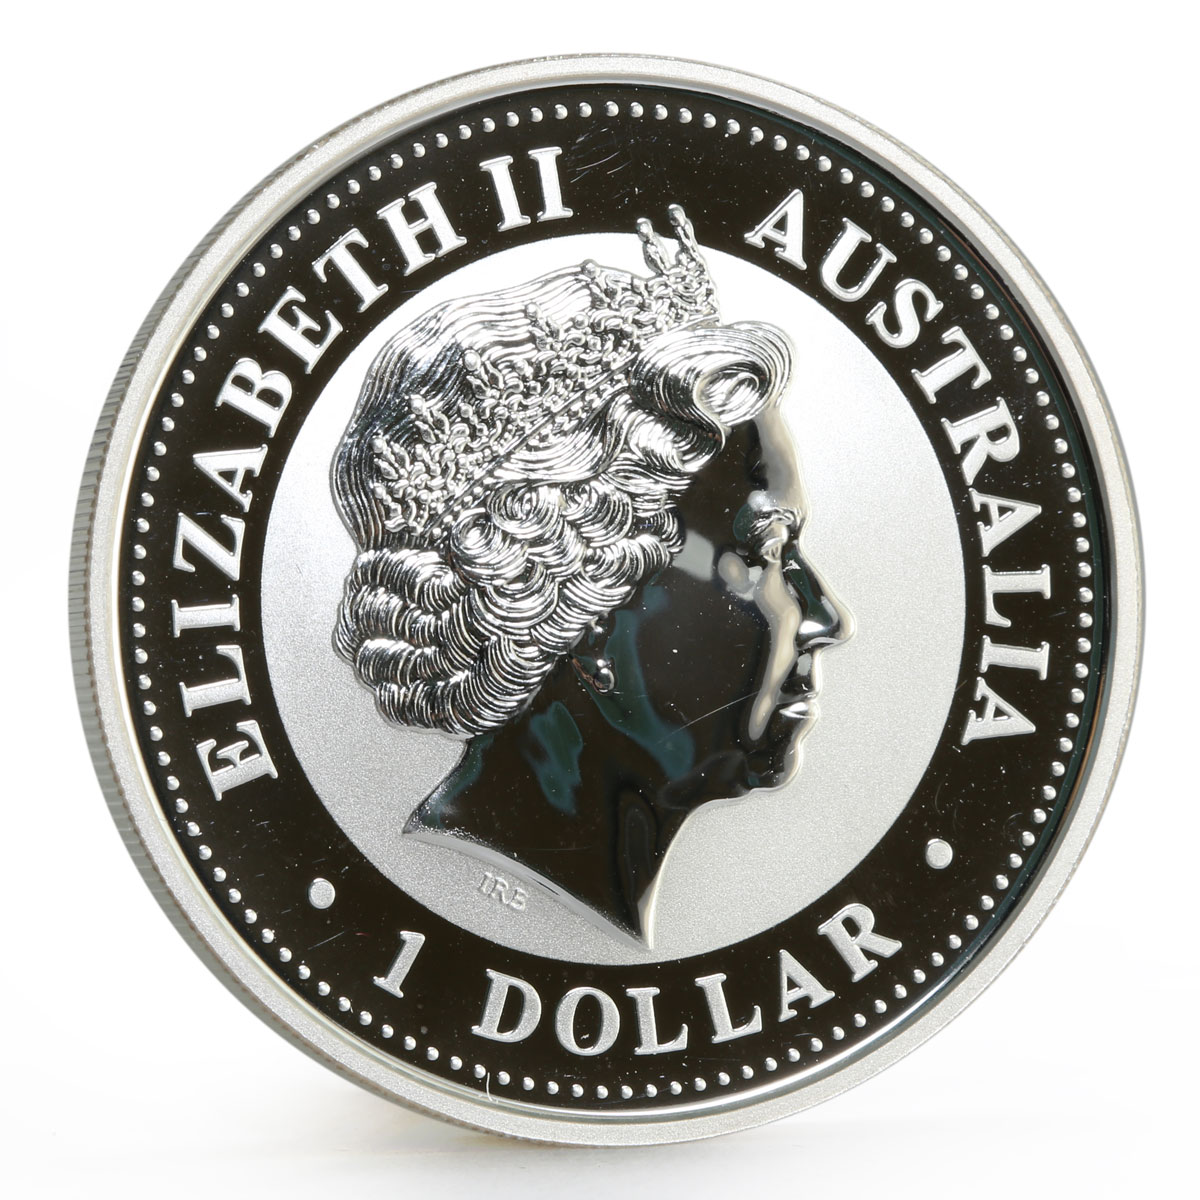 Australia 1 dollar Lunar Calendar I series Year of the Rooster silver coin 2005